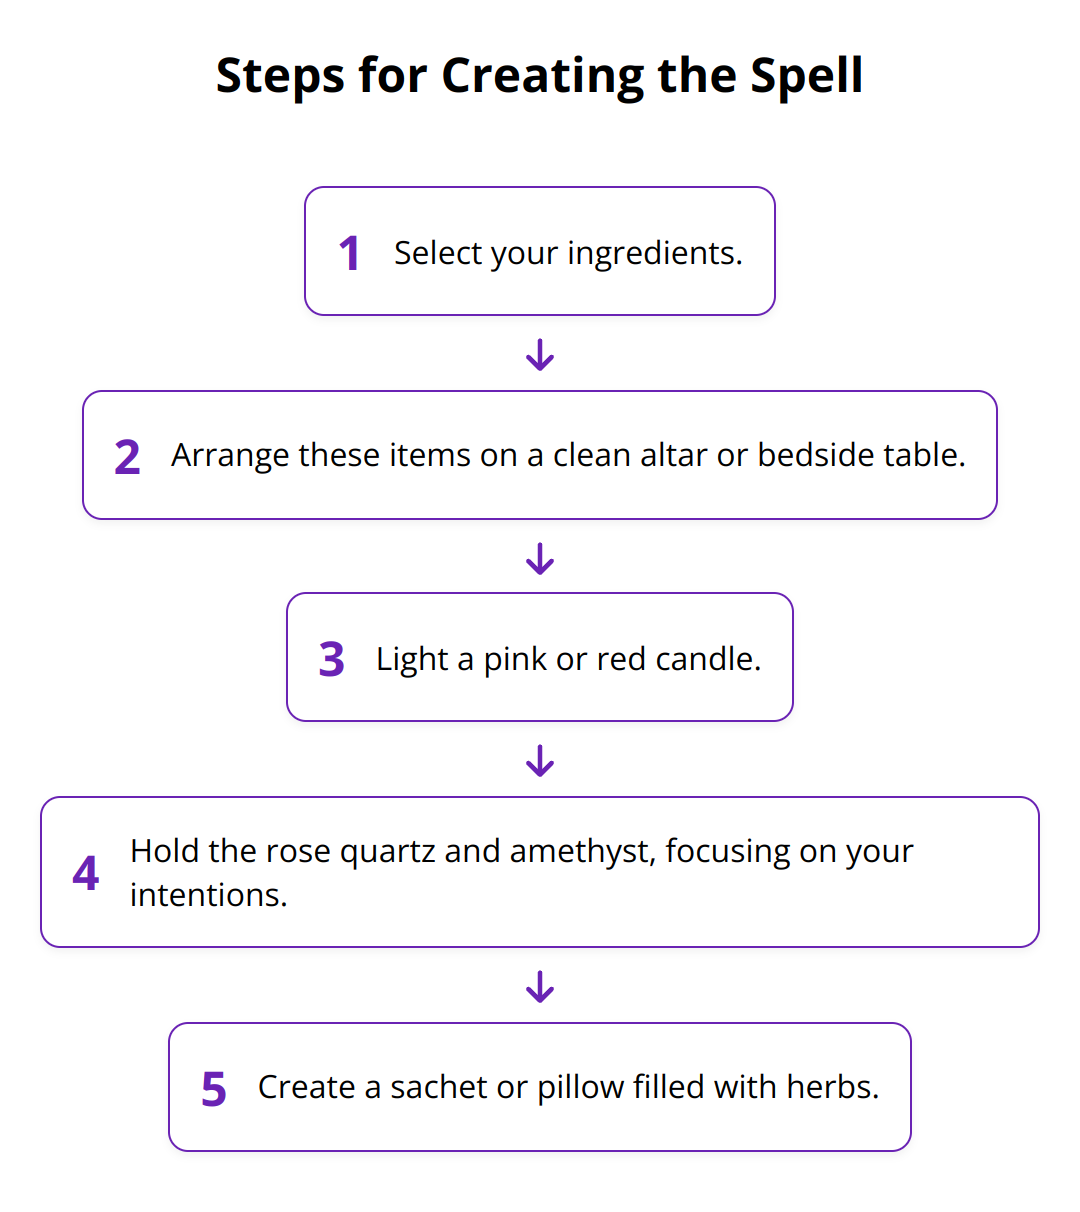 Flow Chart - Steps for Creating the Spell